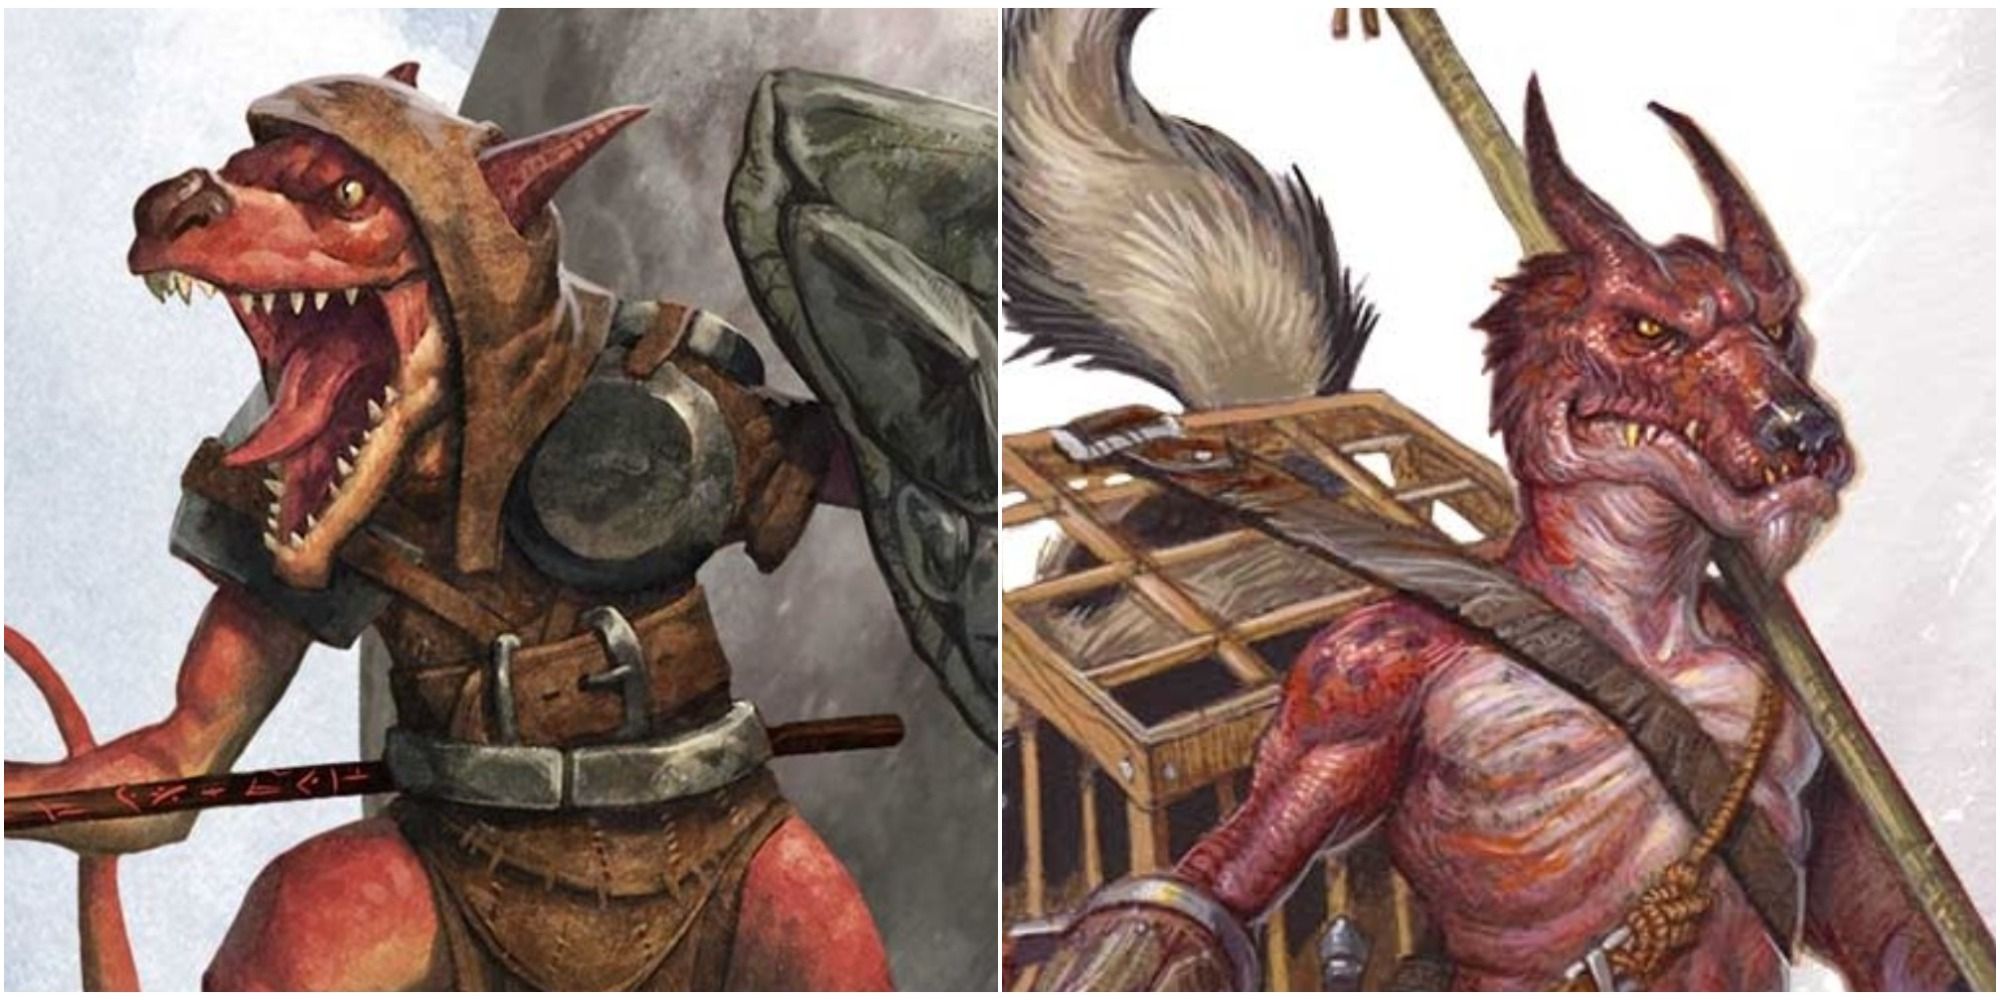 Kobold press' “5E clone” aims to end “monopoly on D&D”